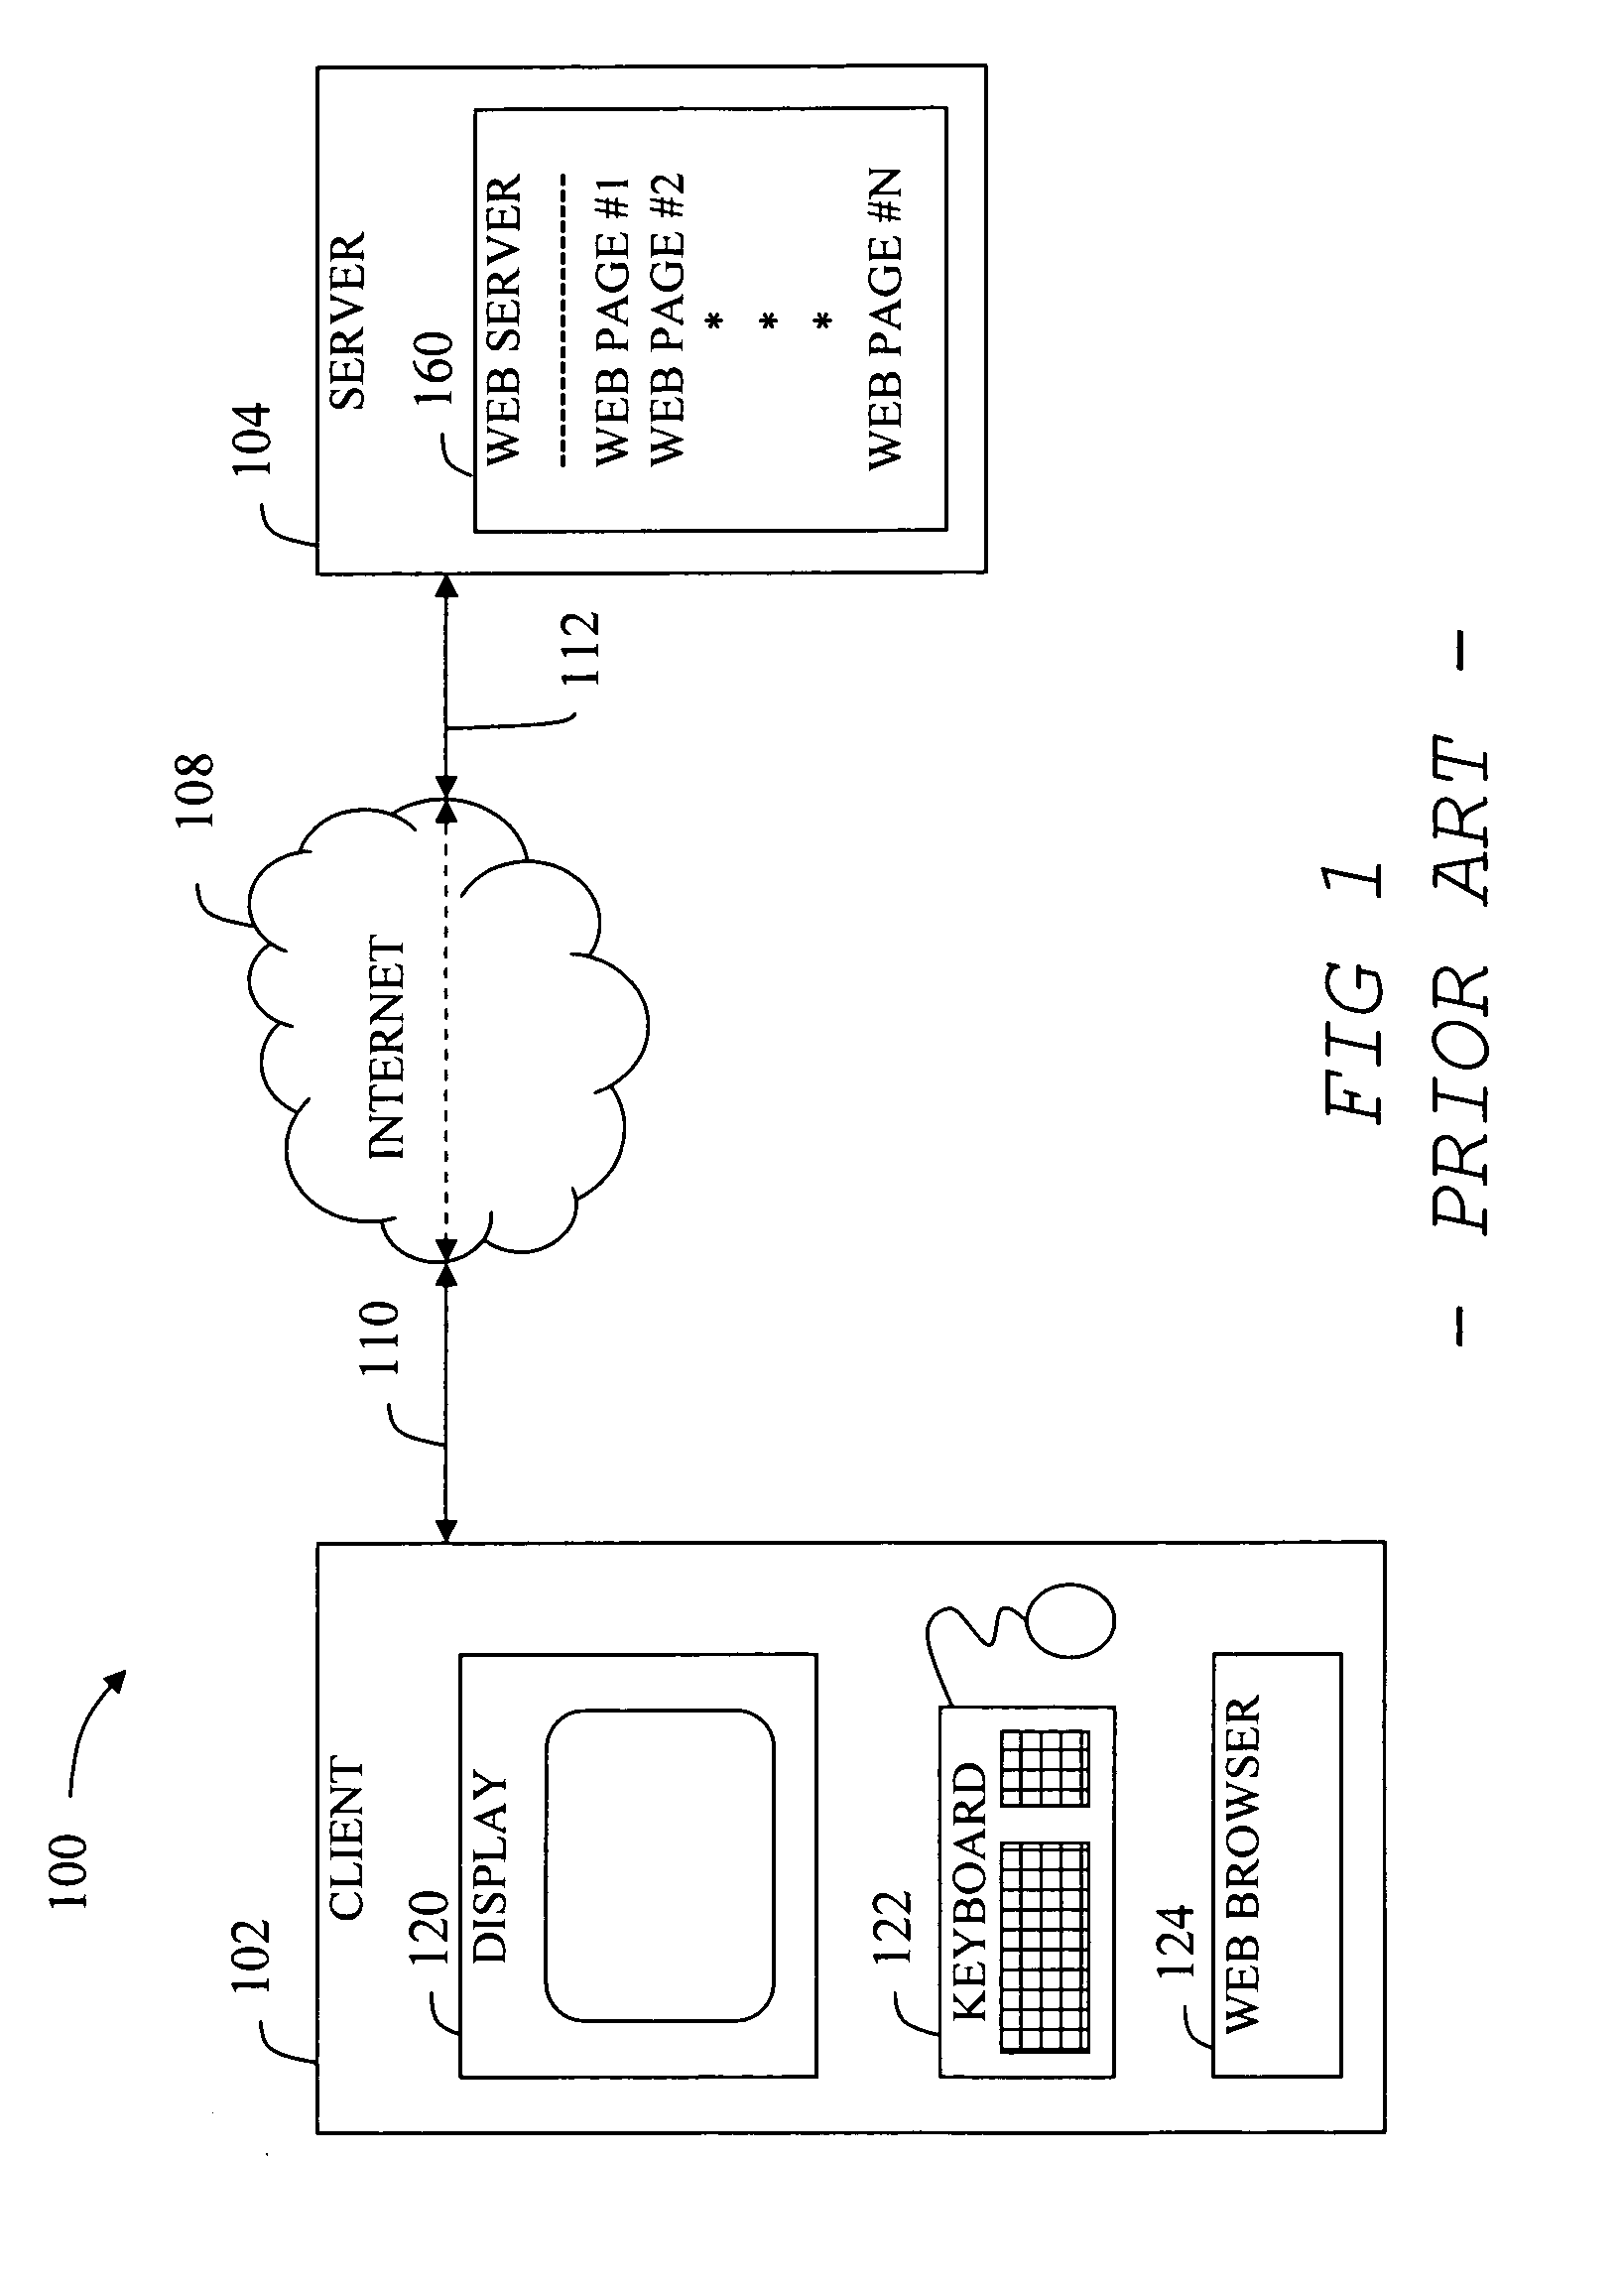 Systems and methods for detecting and disabling malicious script code